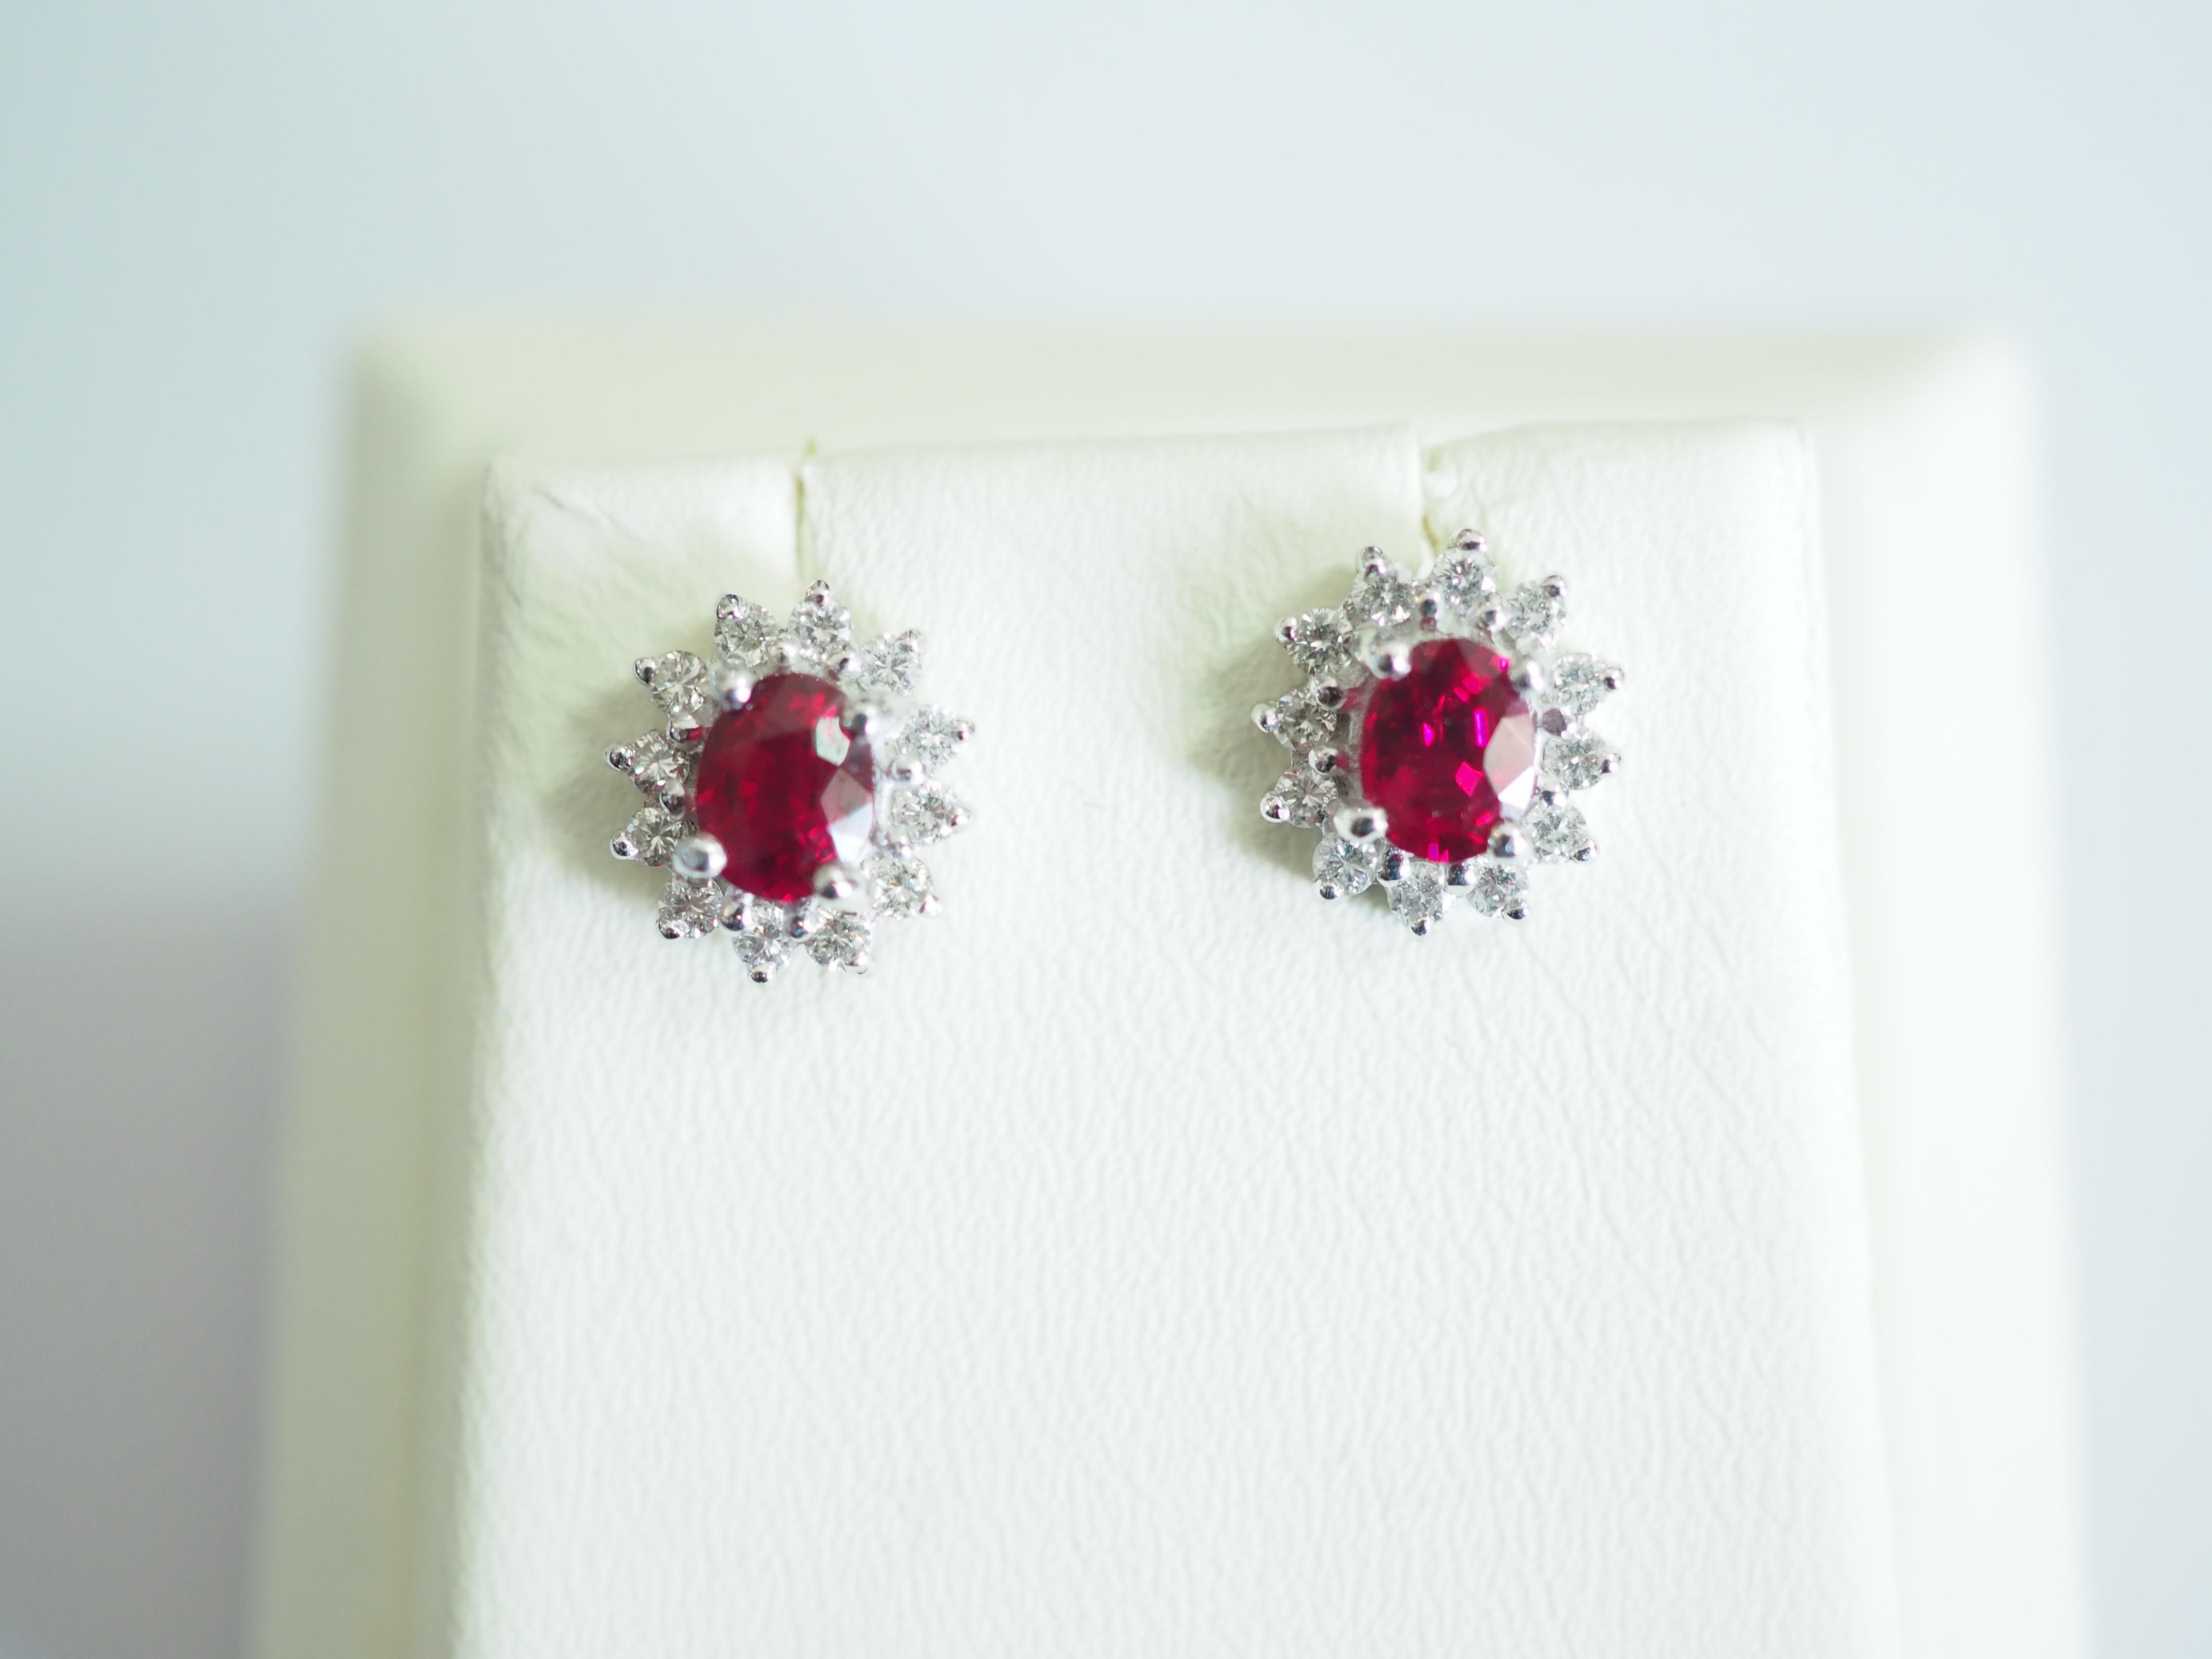 Presented here is a fine gorgeous ruby and diamond cocktail stud earrings. The oval rubies have the color of pigeon's blood which very rare and most sought-after color for rubies. The diamonds are genuine with good color and clarity, very clean. The